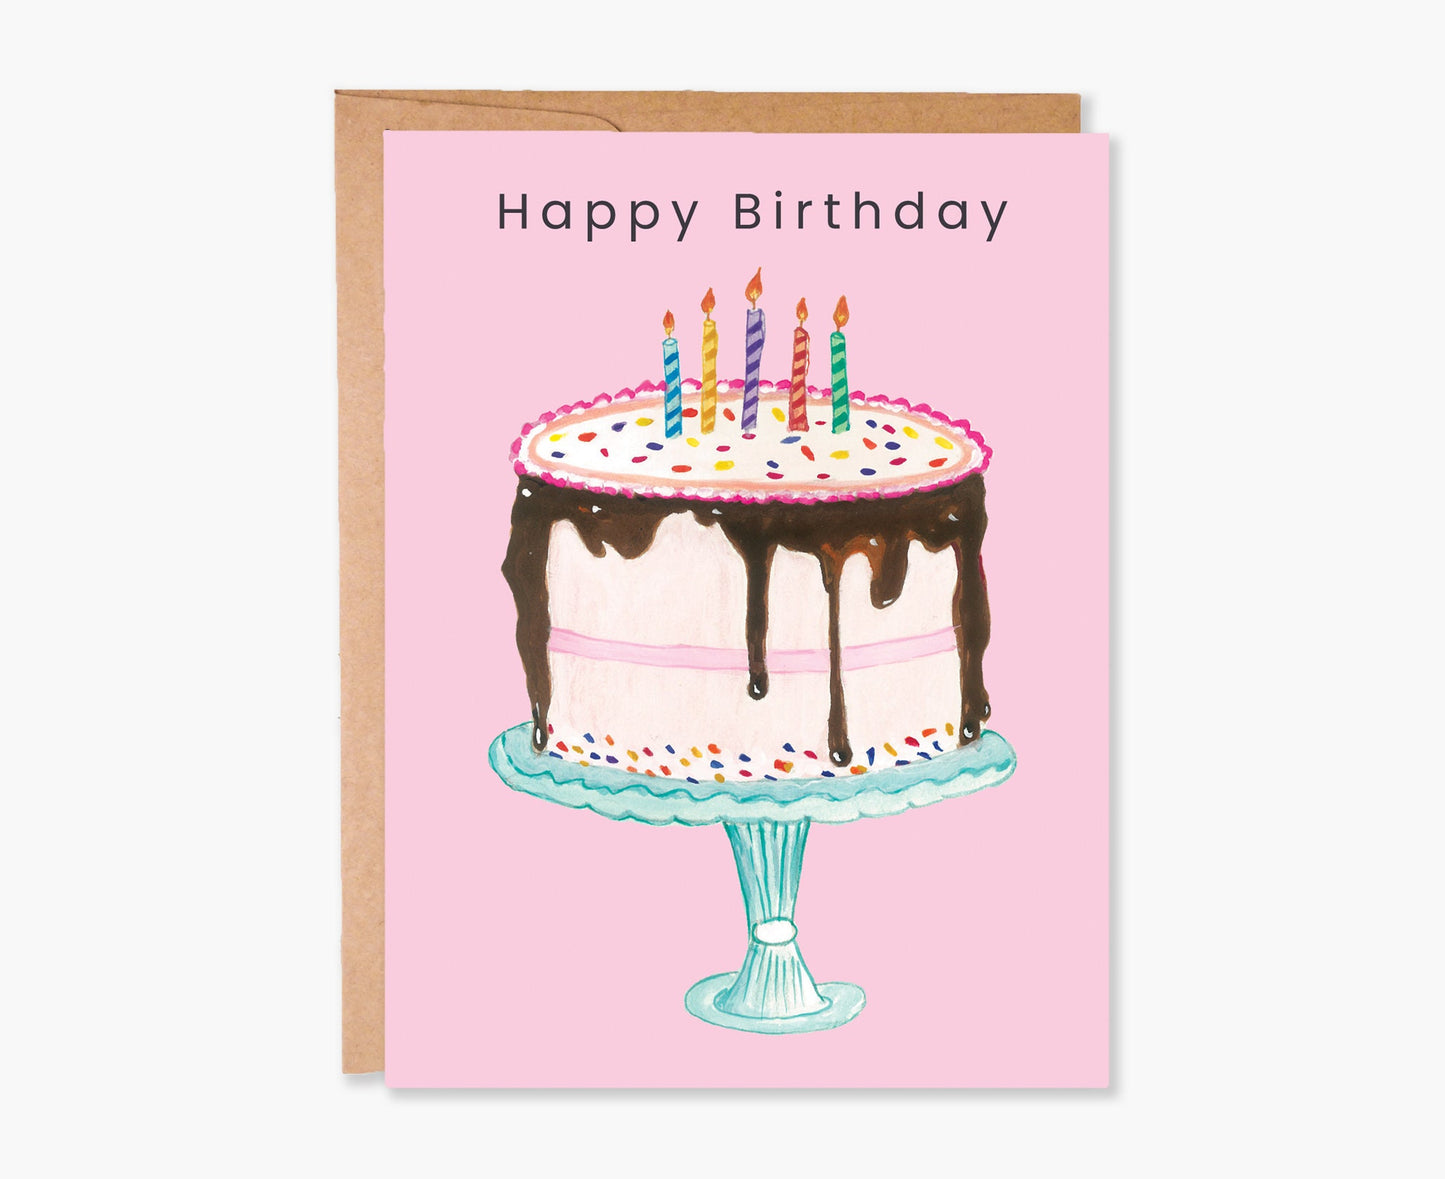 Happy Birthday Card with Cake and Candles, Cute Birthday Card, Birthday, Sweet Birthday Card, Blank Birthday Greeting, Item Code - COTC B43